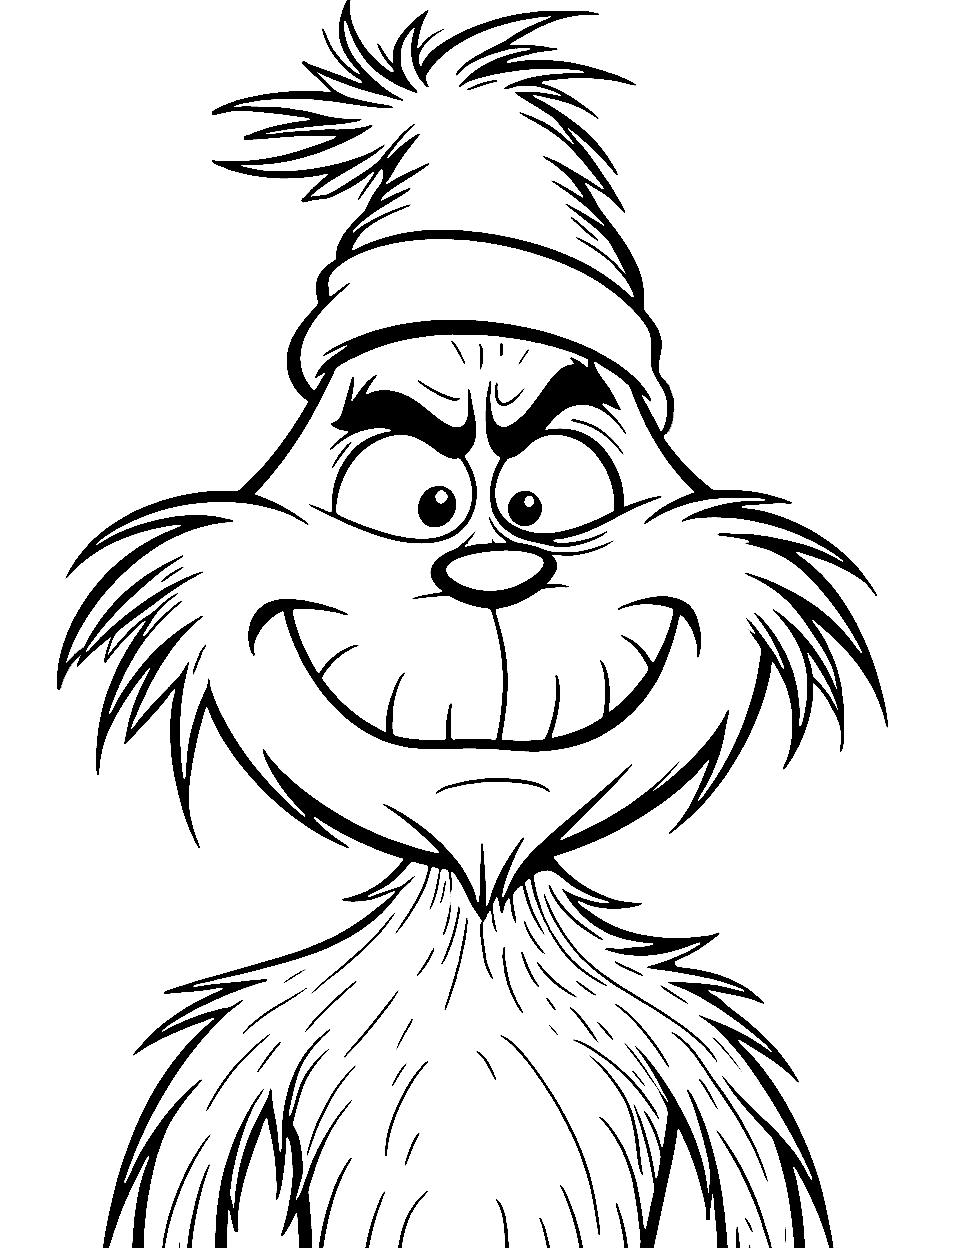 Grinch Face Close-Up Coloring Page - A close-up of the Grinch’s face showing detailed expressions.